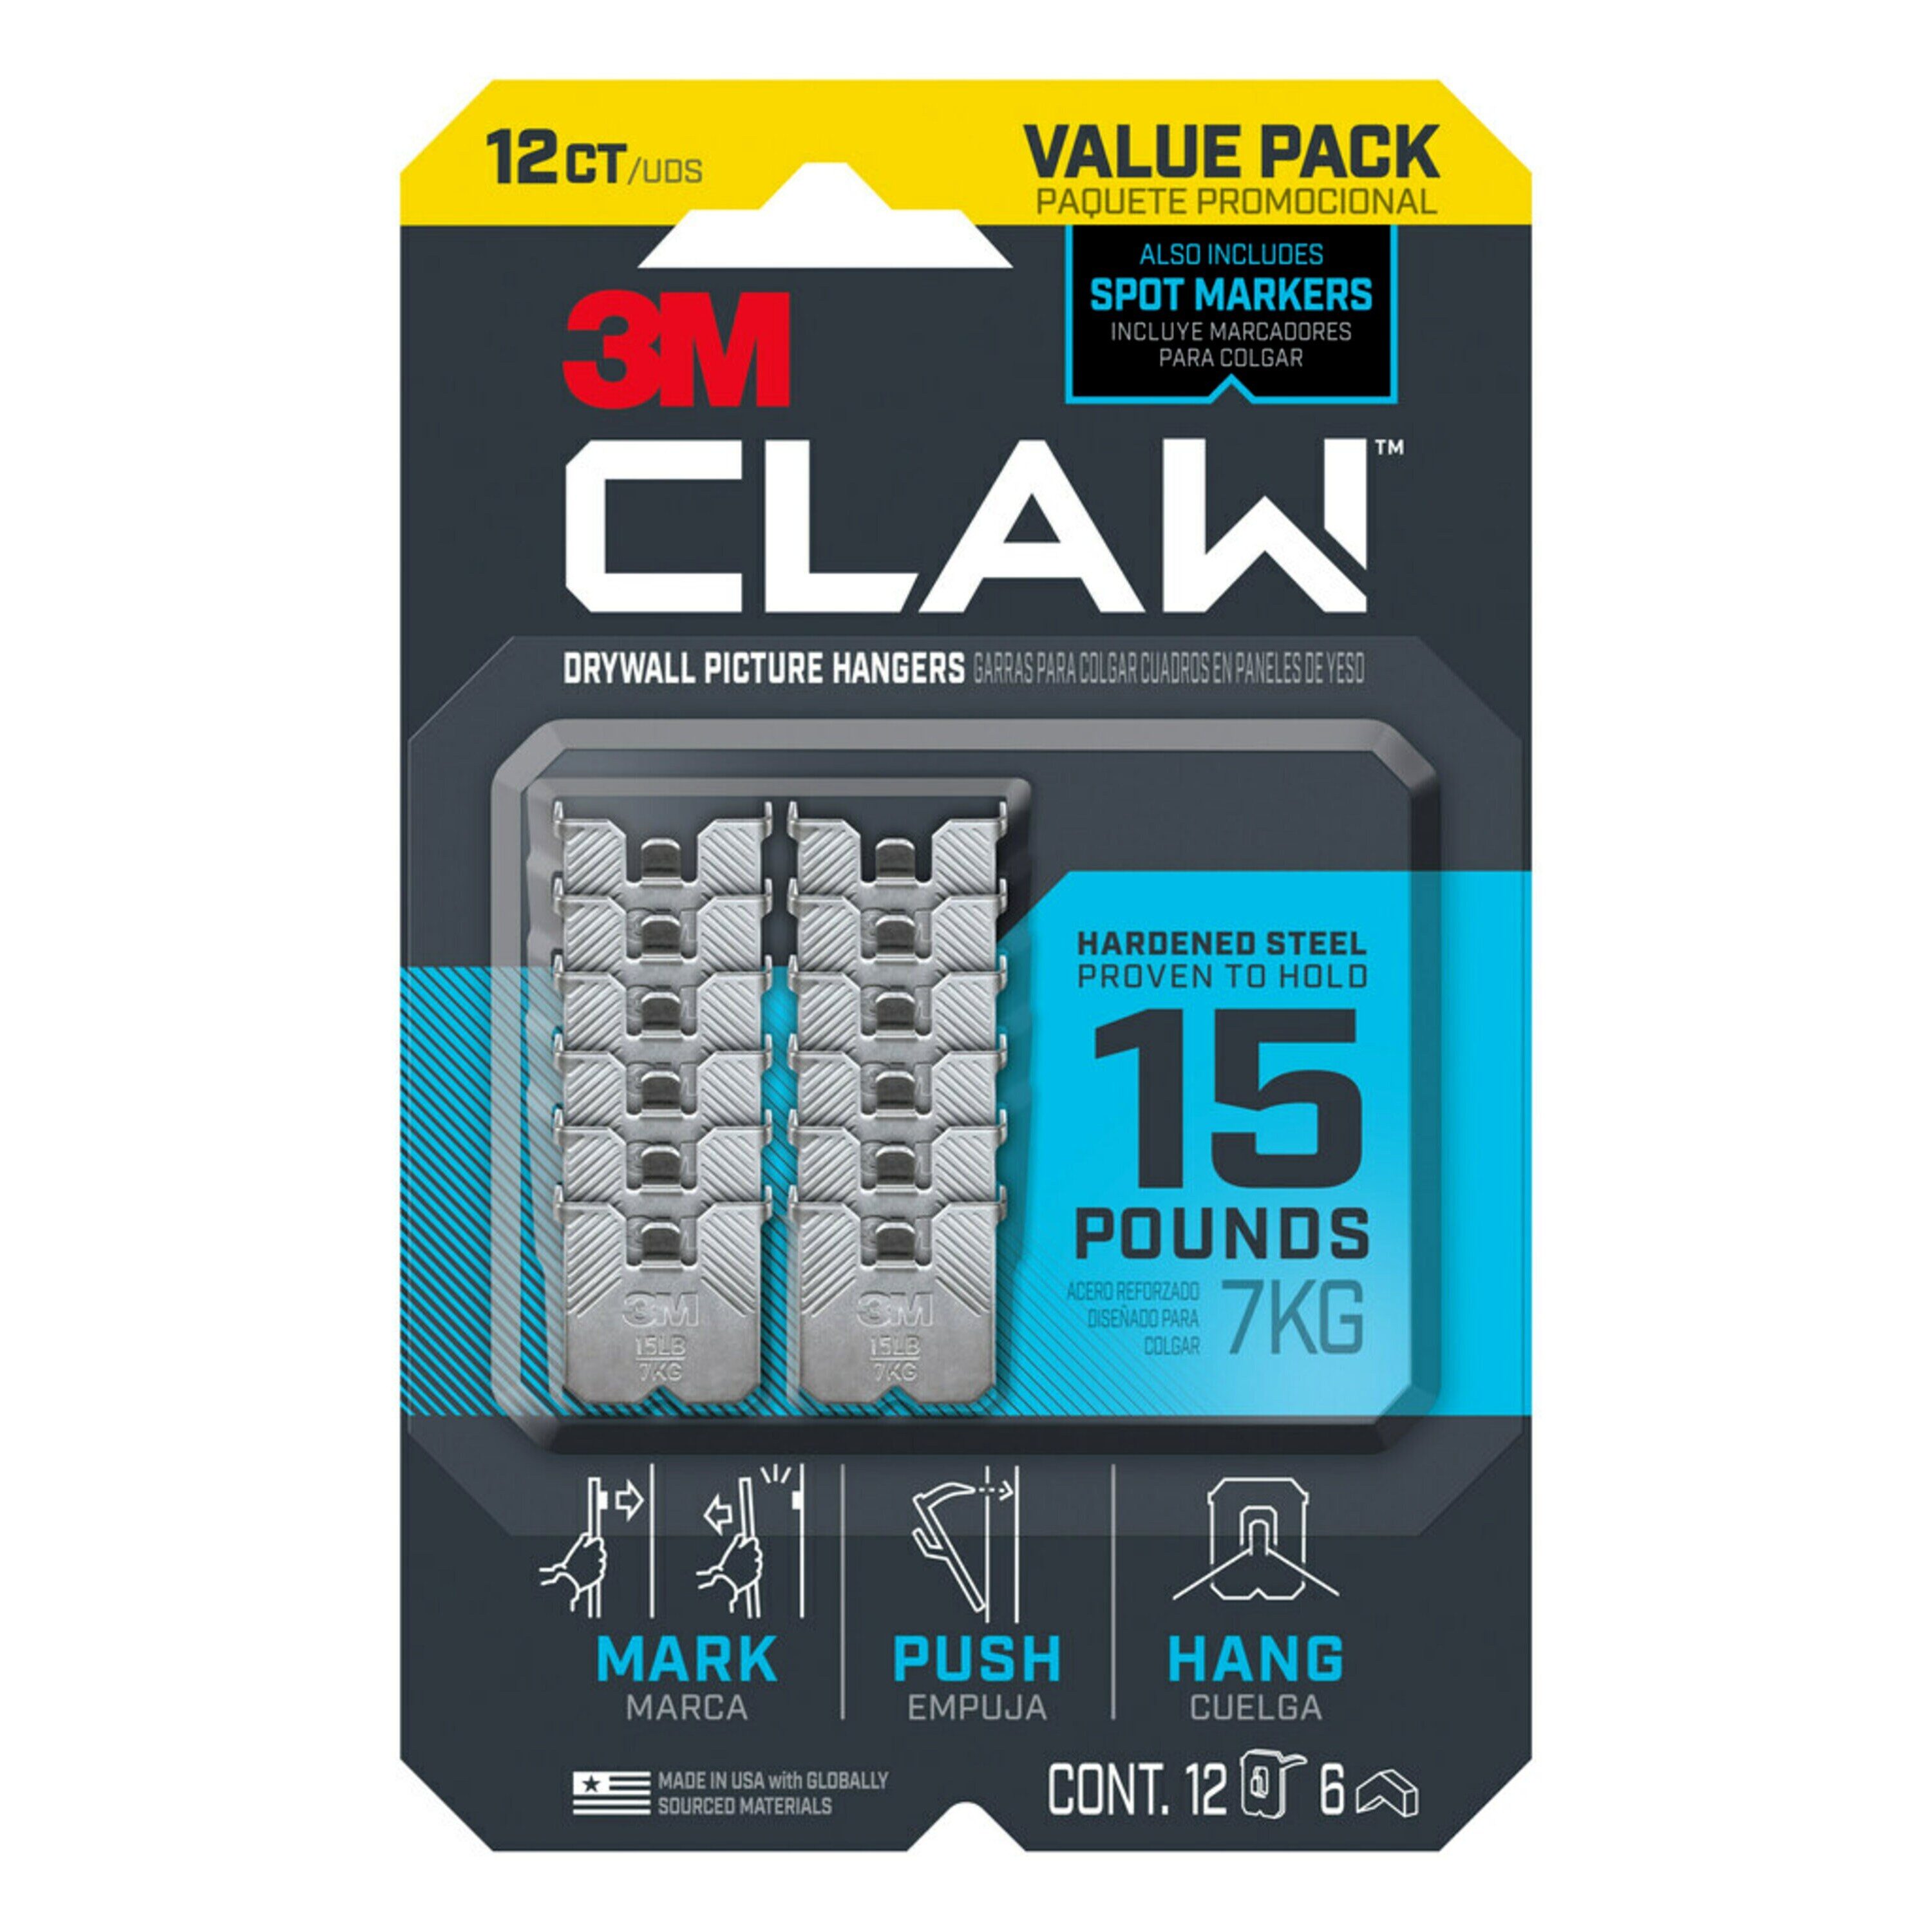 3M CLAW™ Drywall Picture Hanger, holds 25 lbs, 1 Hanger/Pack